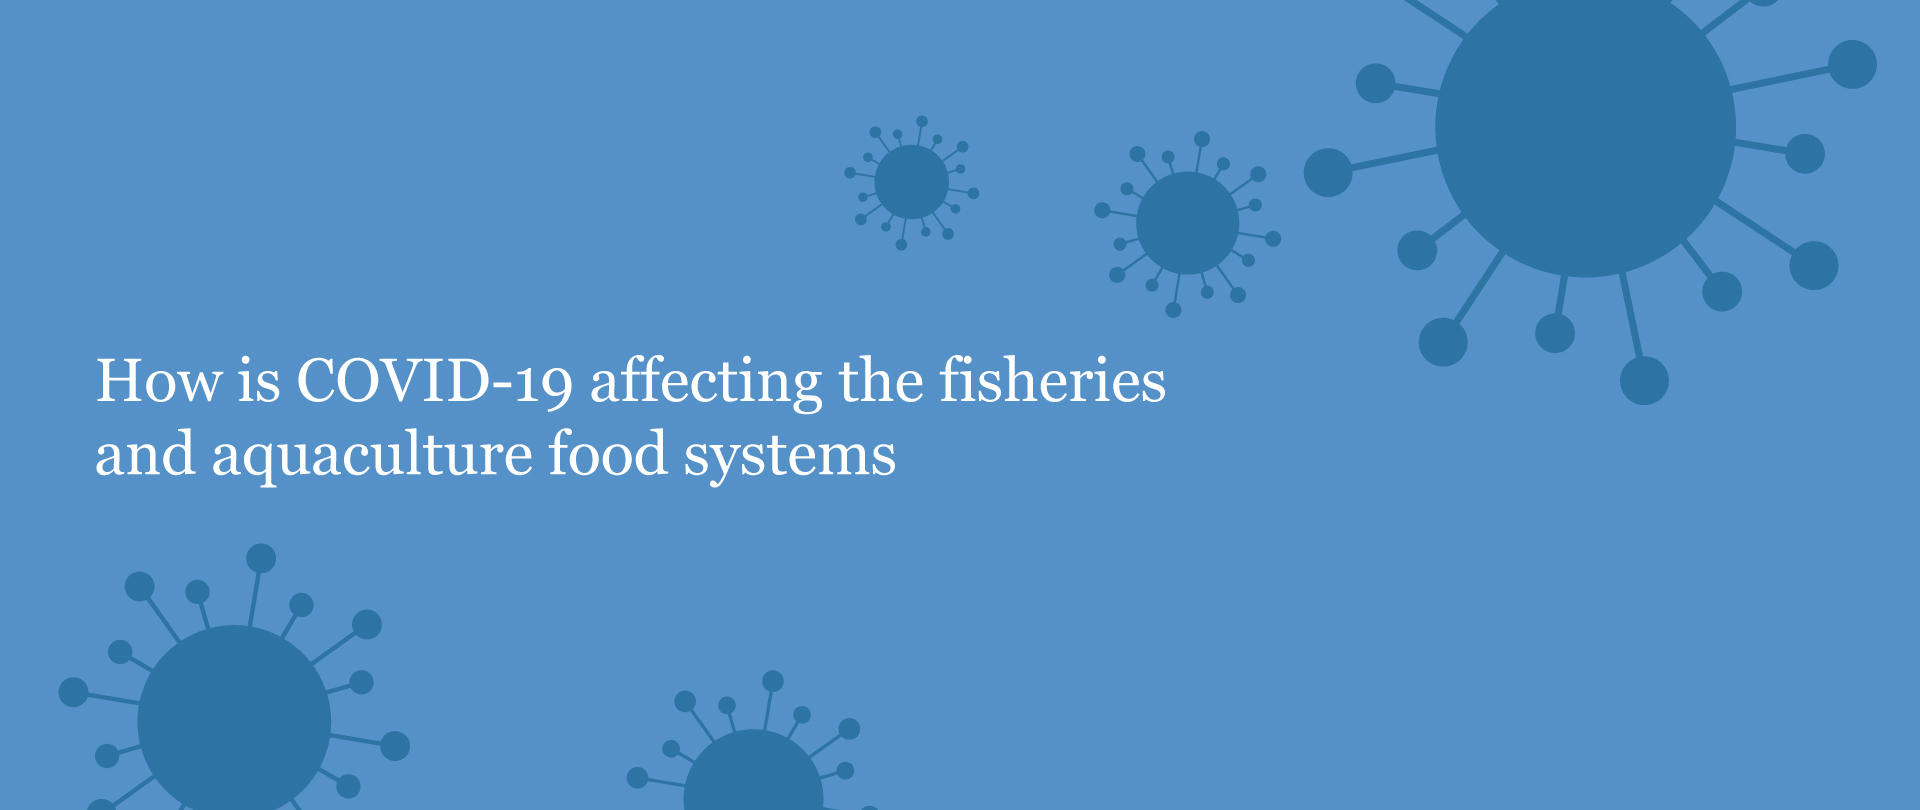 How is COVID-19 affecting the fisheries and aquaculture food systems |  GLOBEFISH | Food and Agriculture Organization of the United Nations